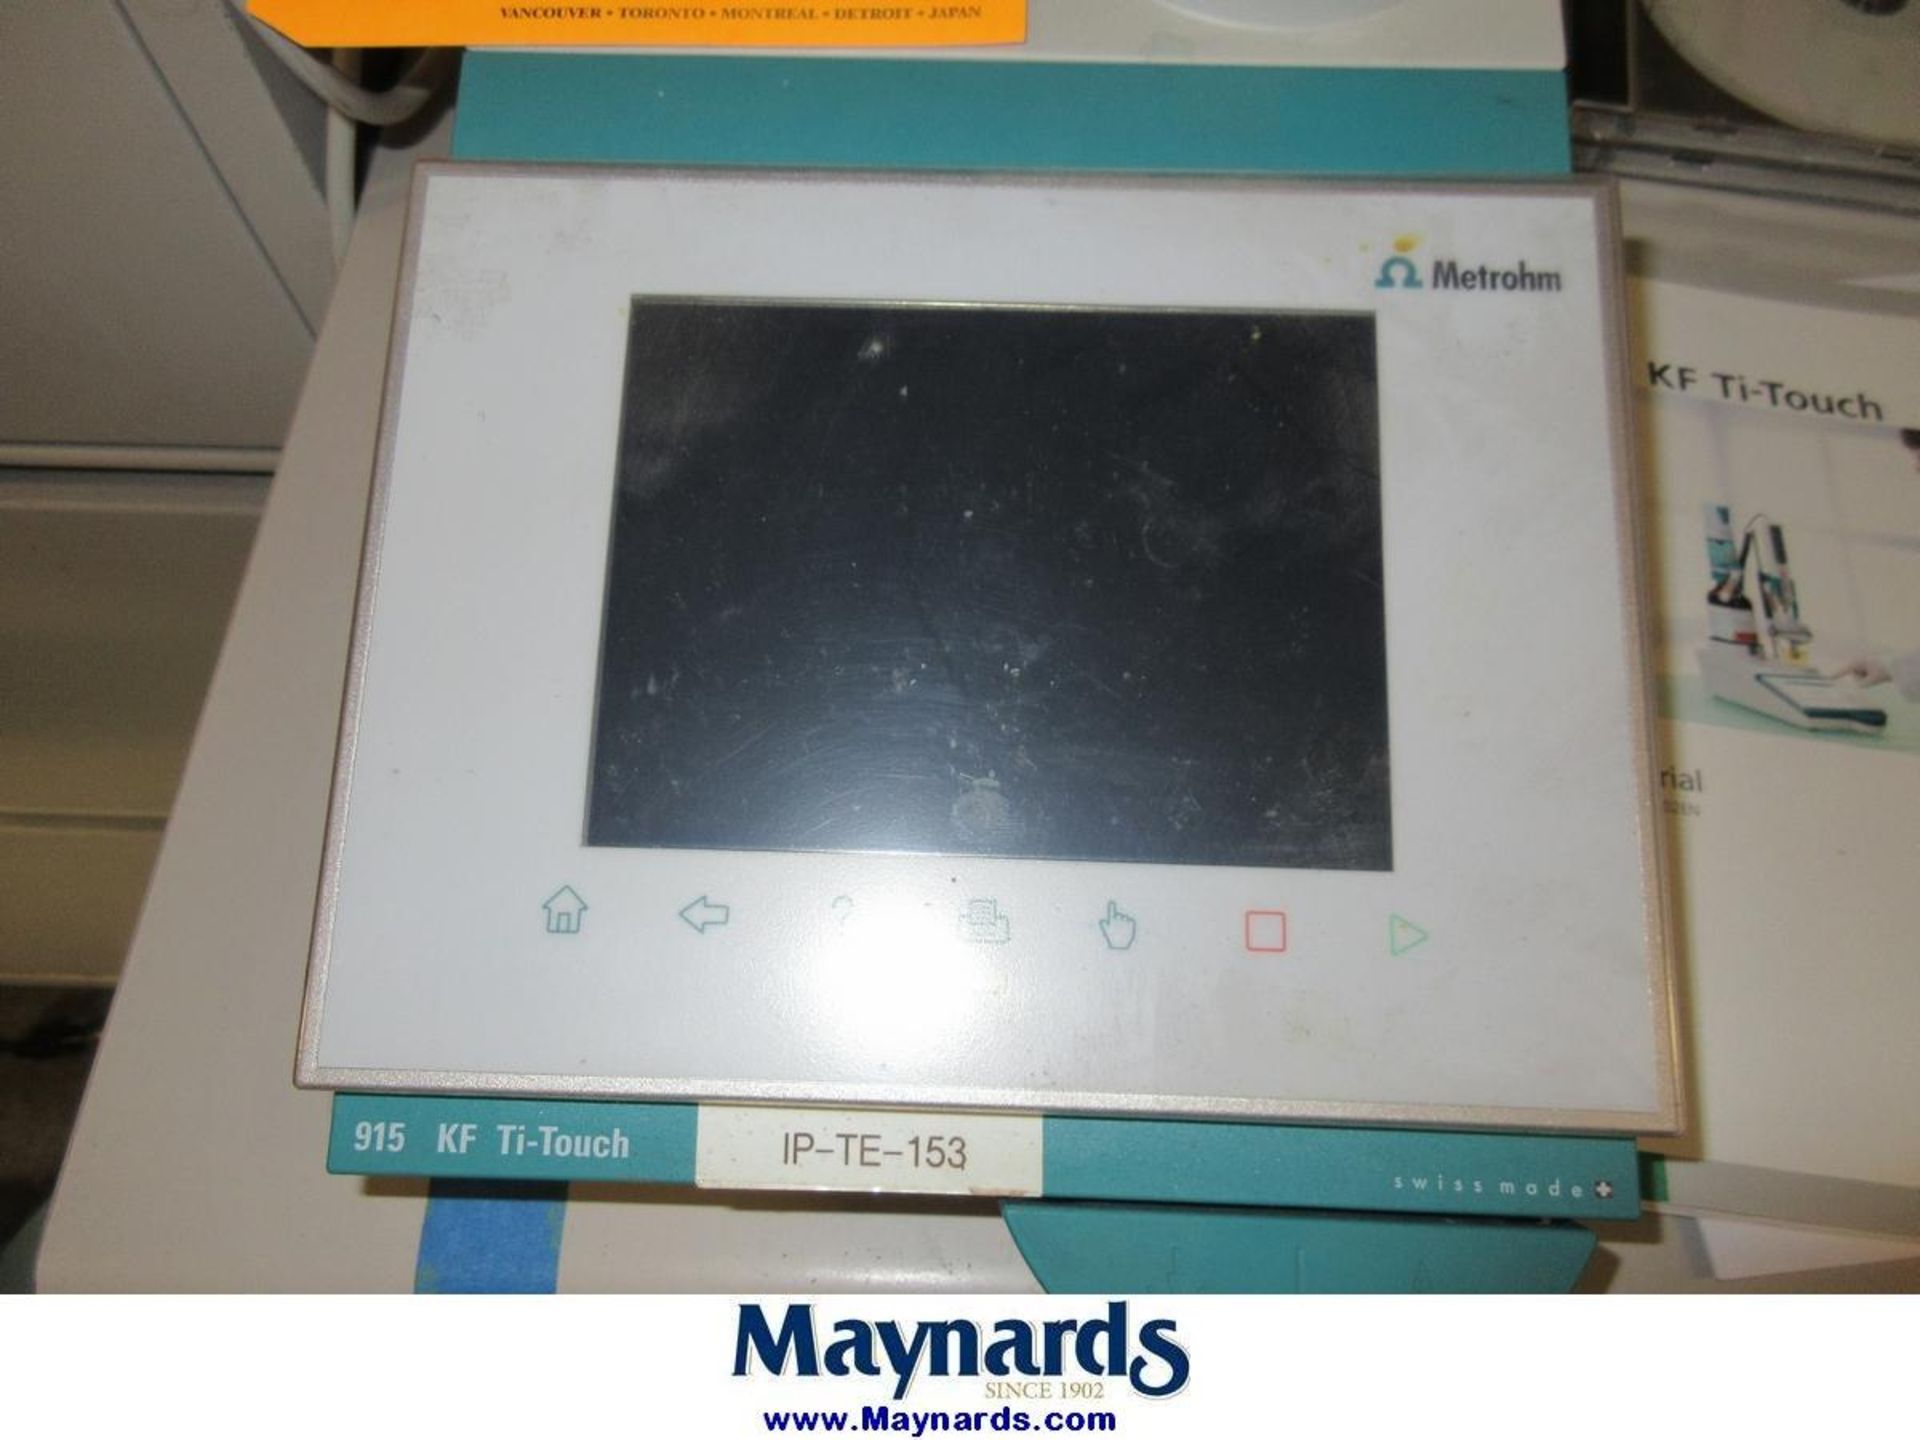 Metrohm 915 KF Ti-Touch Compact Titrator - Image 4 of 6